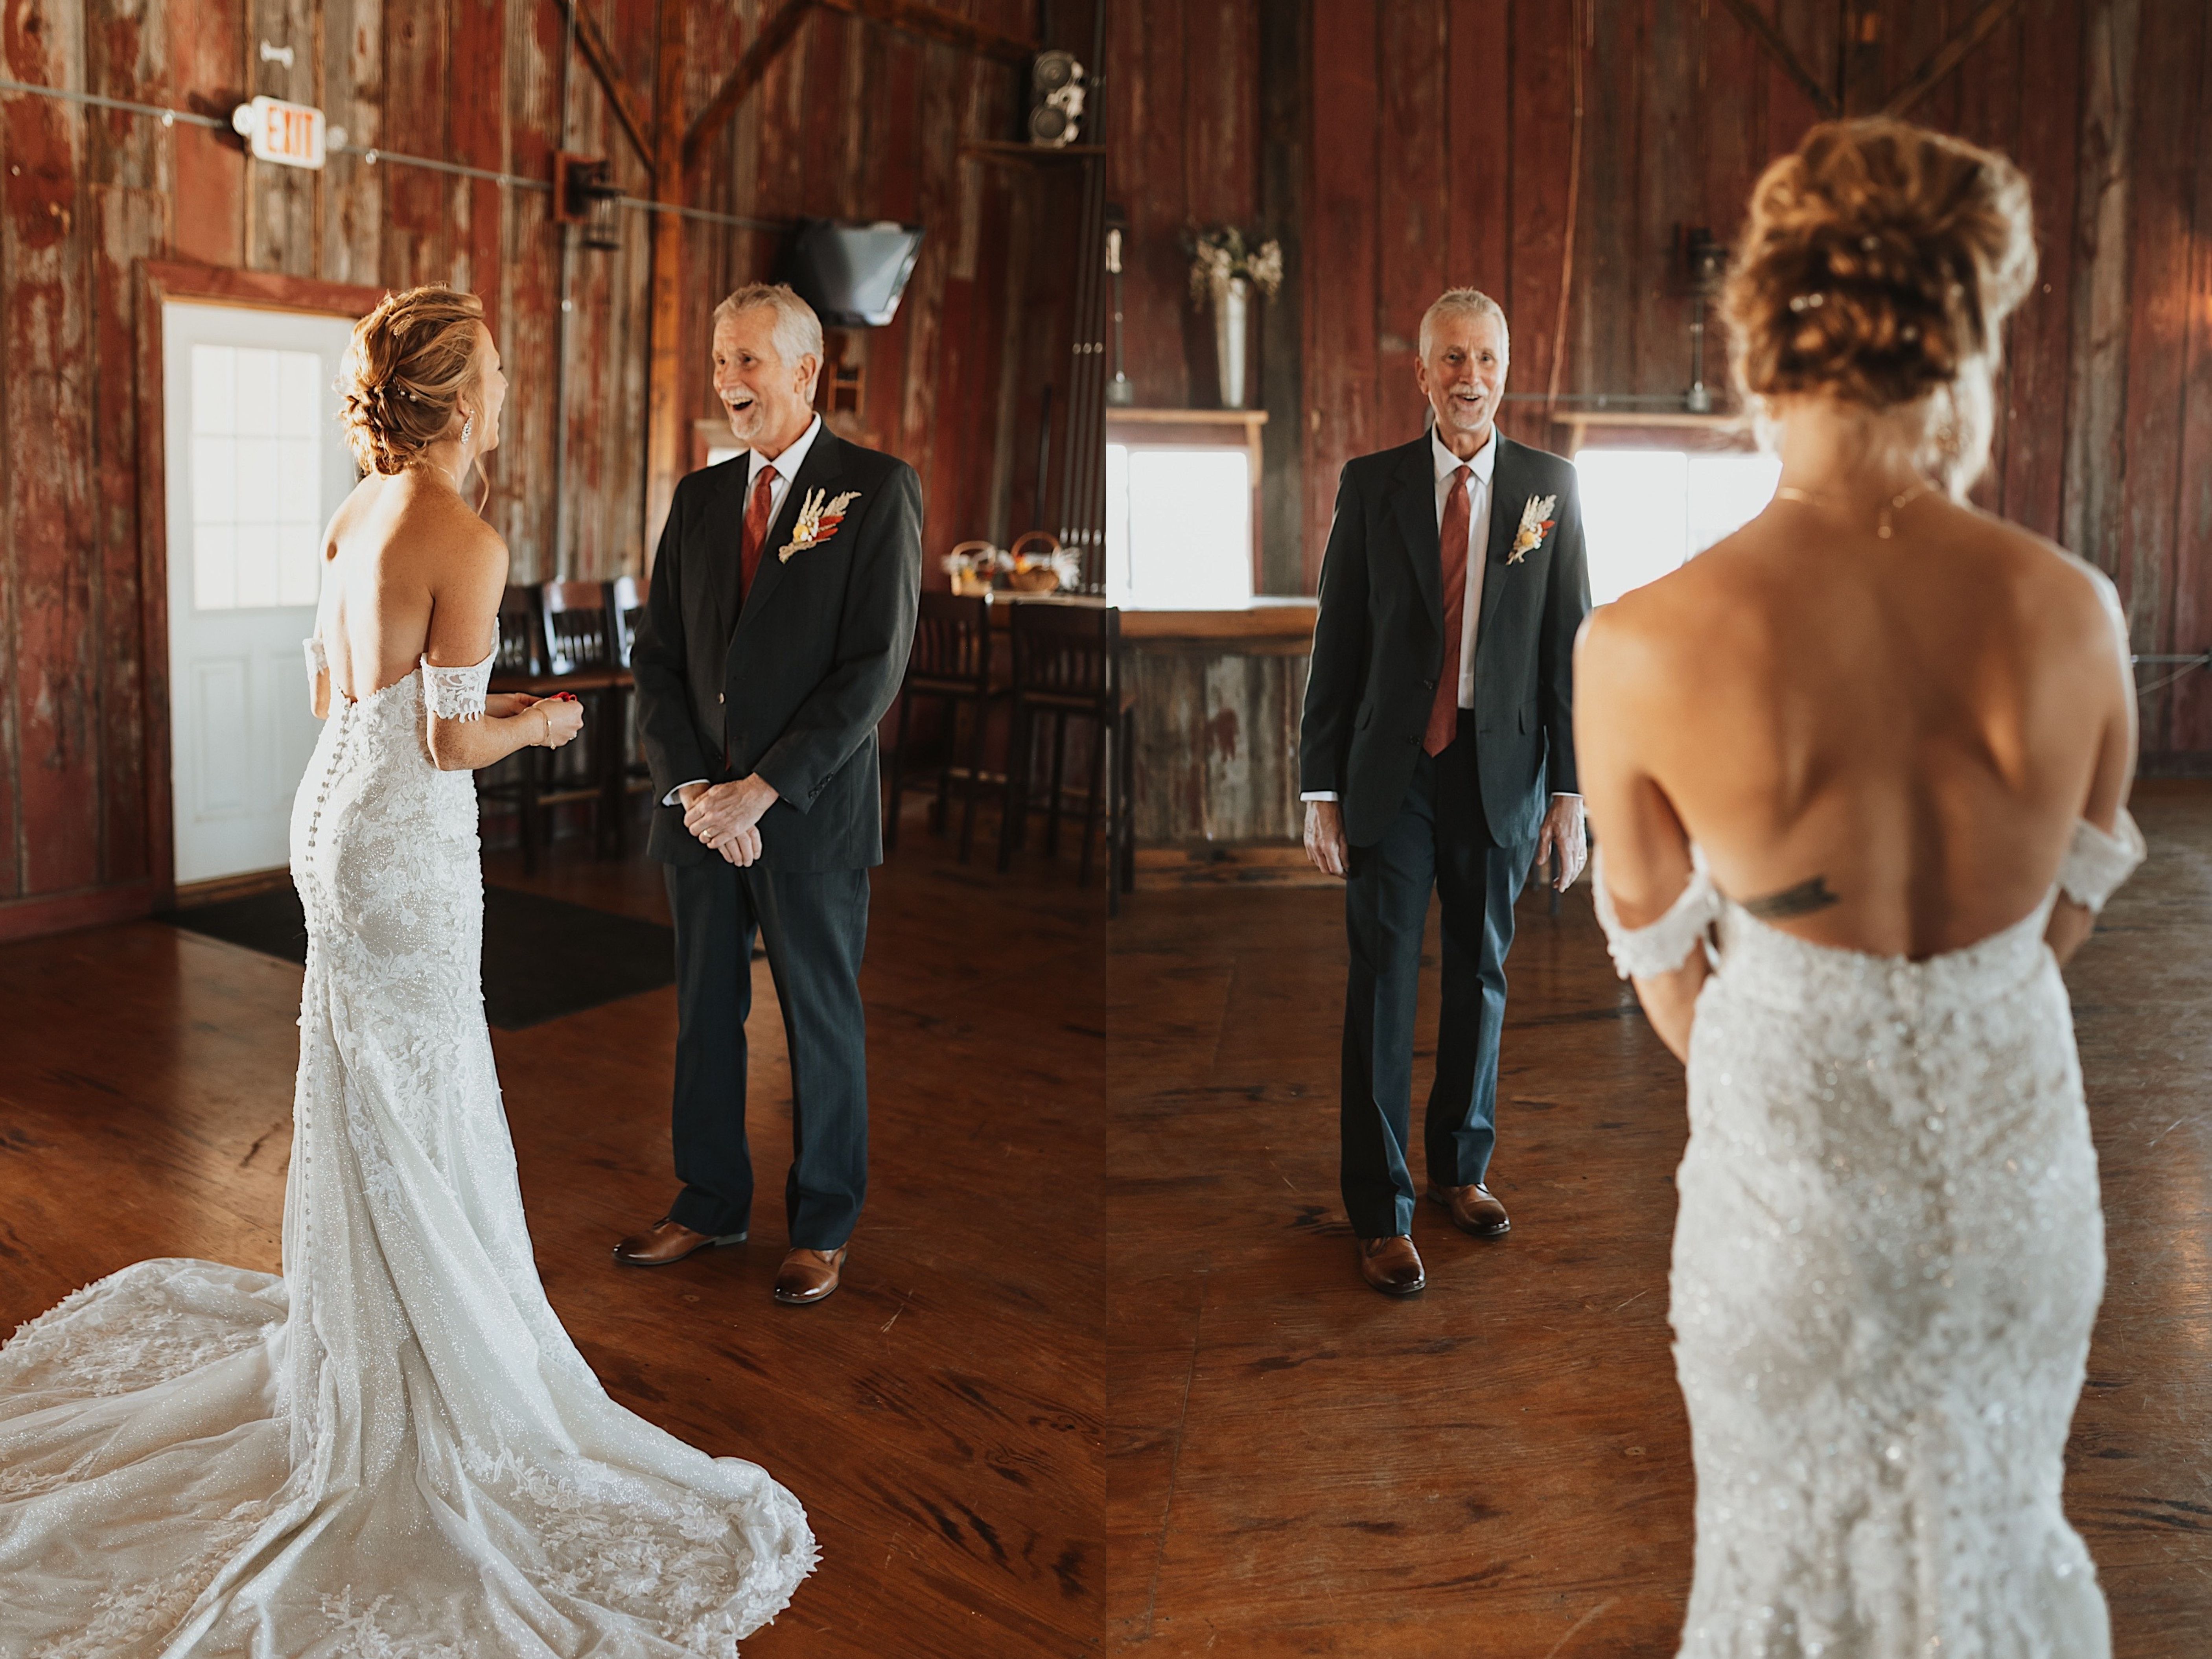 2 photos next to one another, both are of a father reacting to seeing his daughter in her wedding dress during their first look